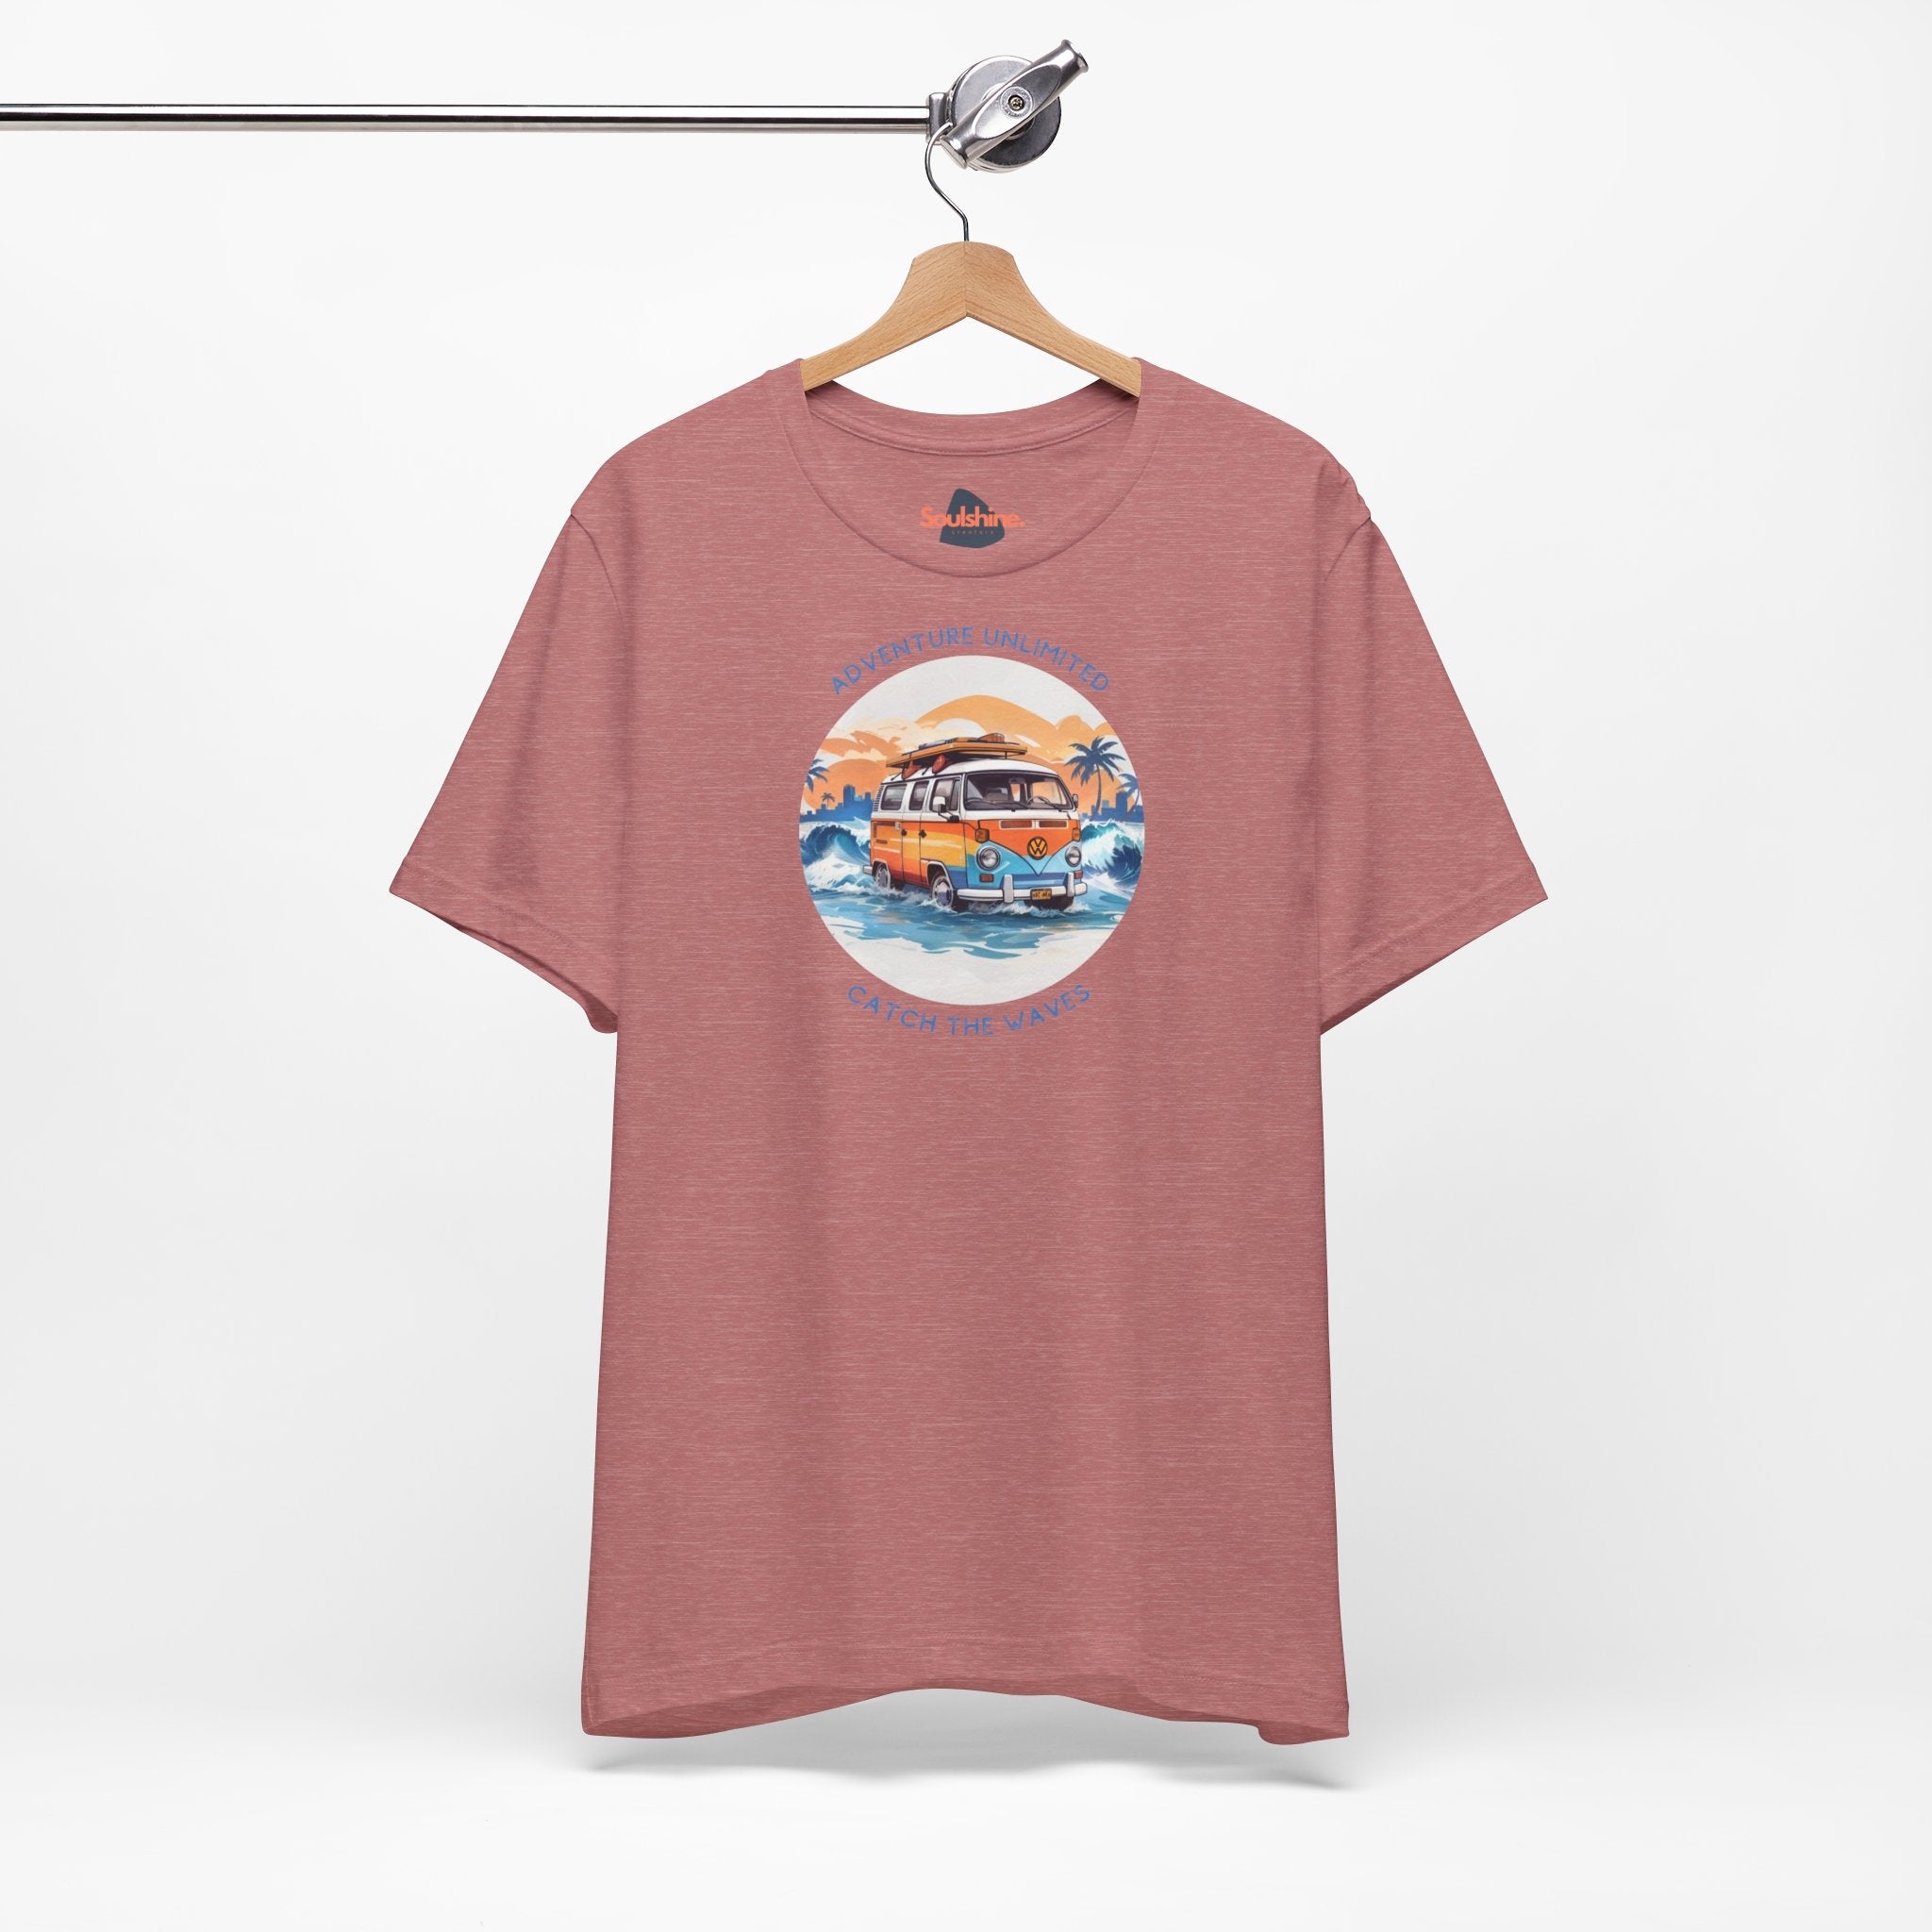 Red sunset boat graphic printed on red t-shirt - Adventure Unlimited Soulshinecreators Bella & Canvas EU